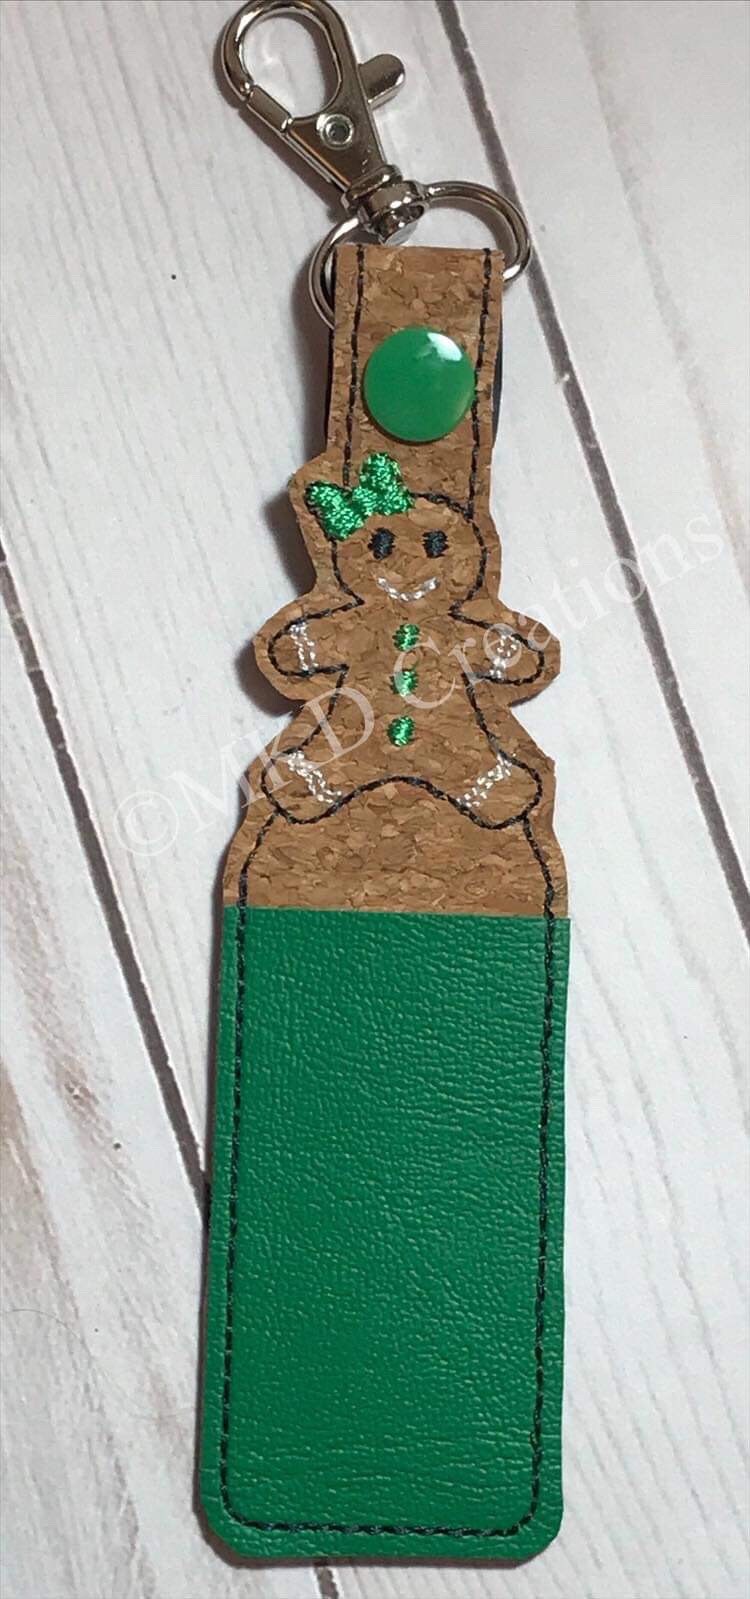 Gingerbread Girl with Green Bow Key chain lip balm holder w/o lip balm | key chain lip balm holder lip balm not included